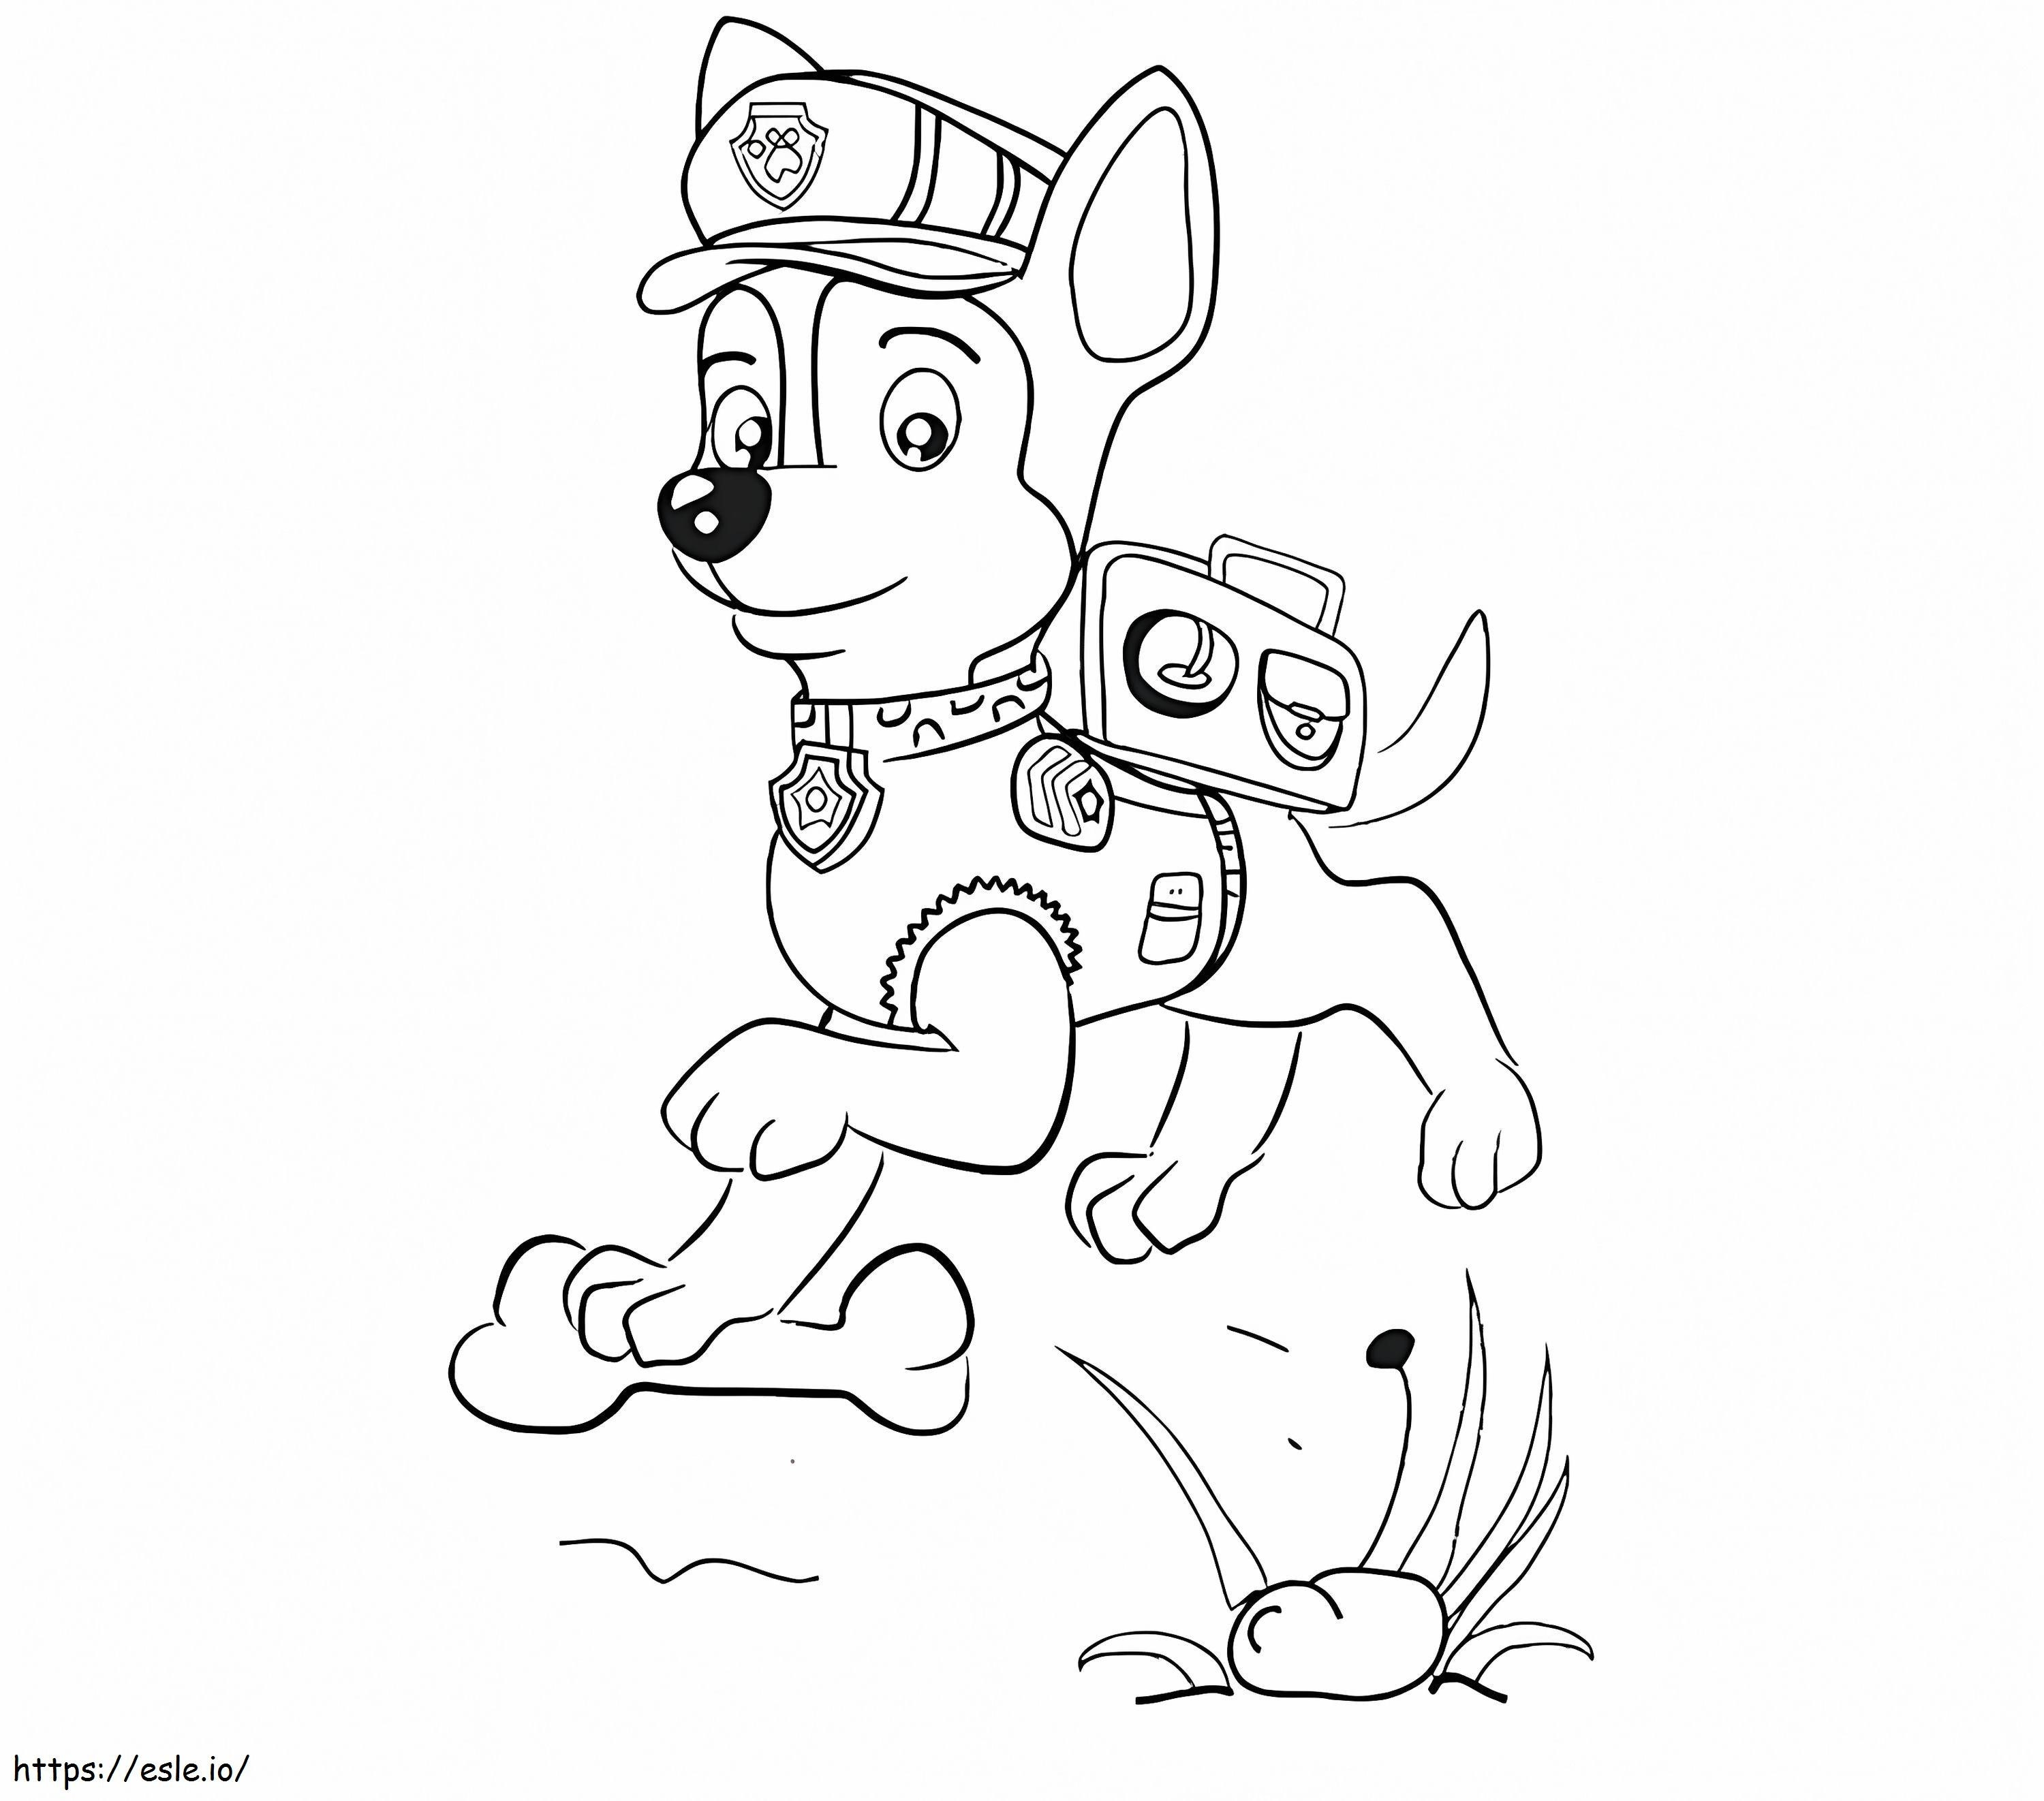 Chase Paw Patrol 5 coloring page